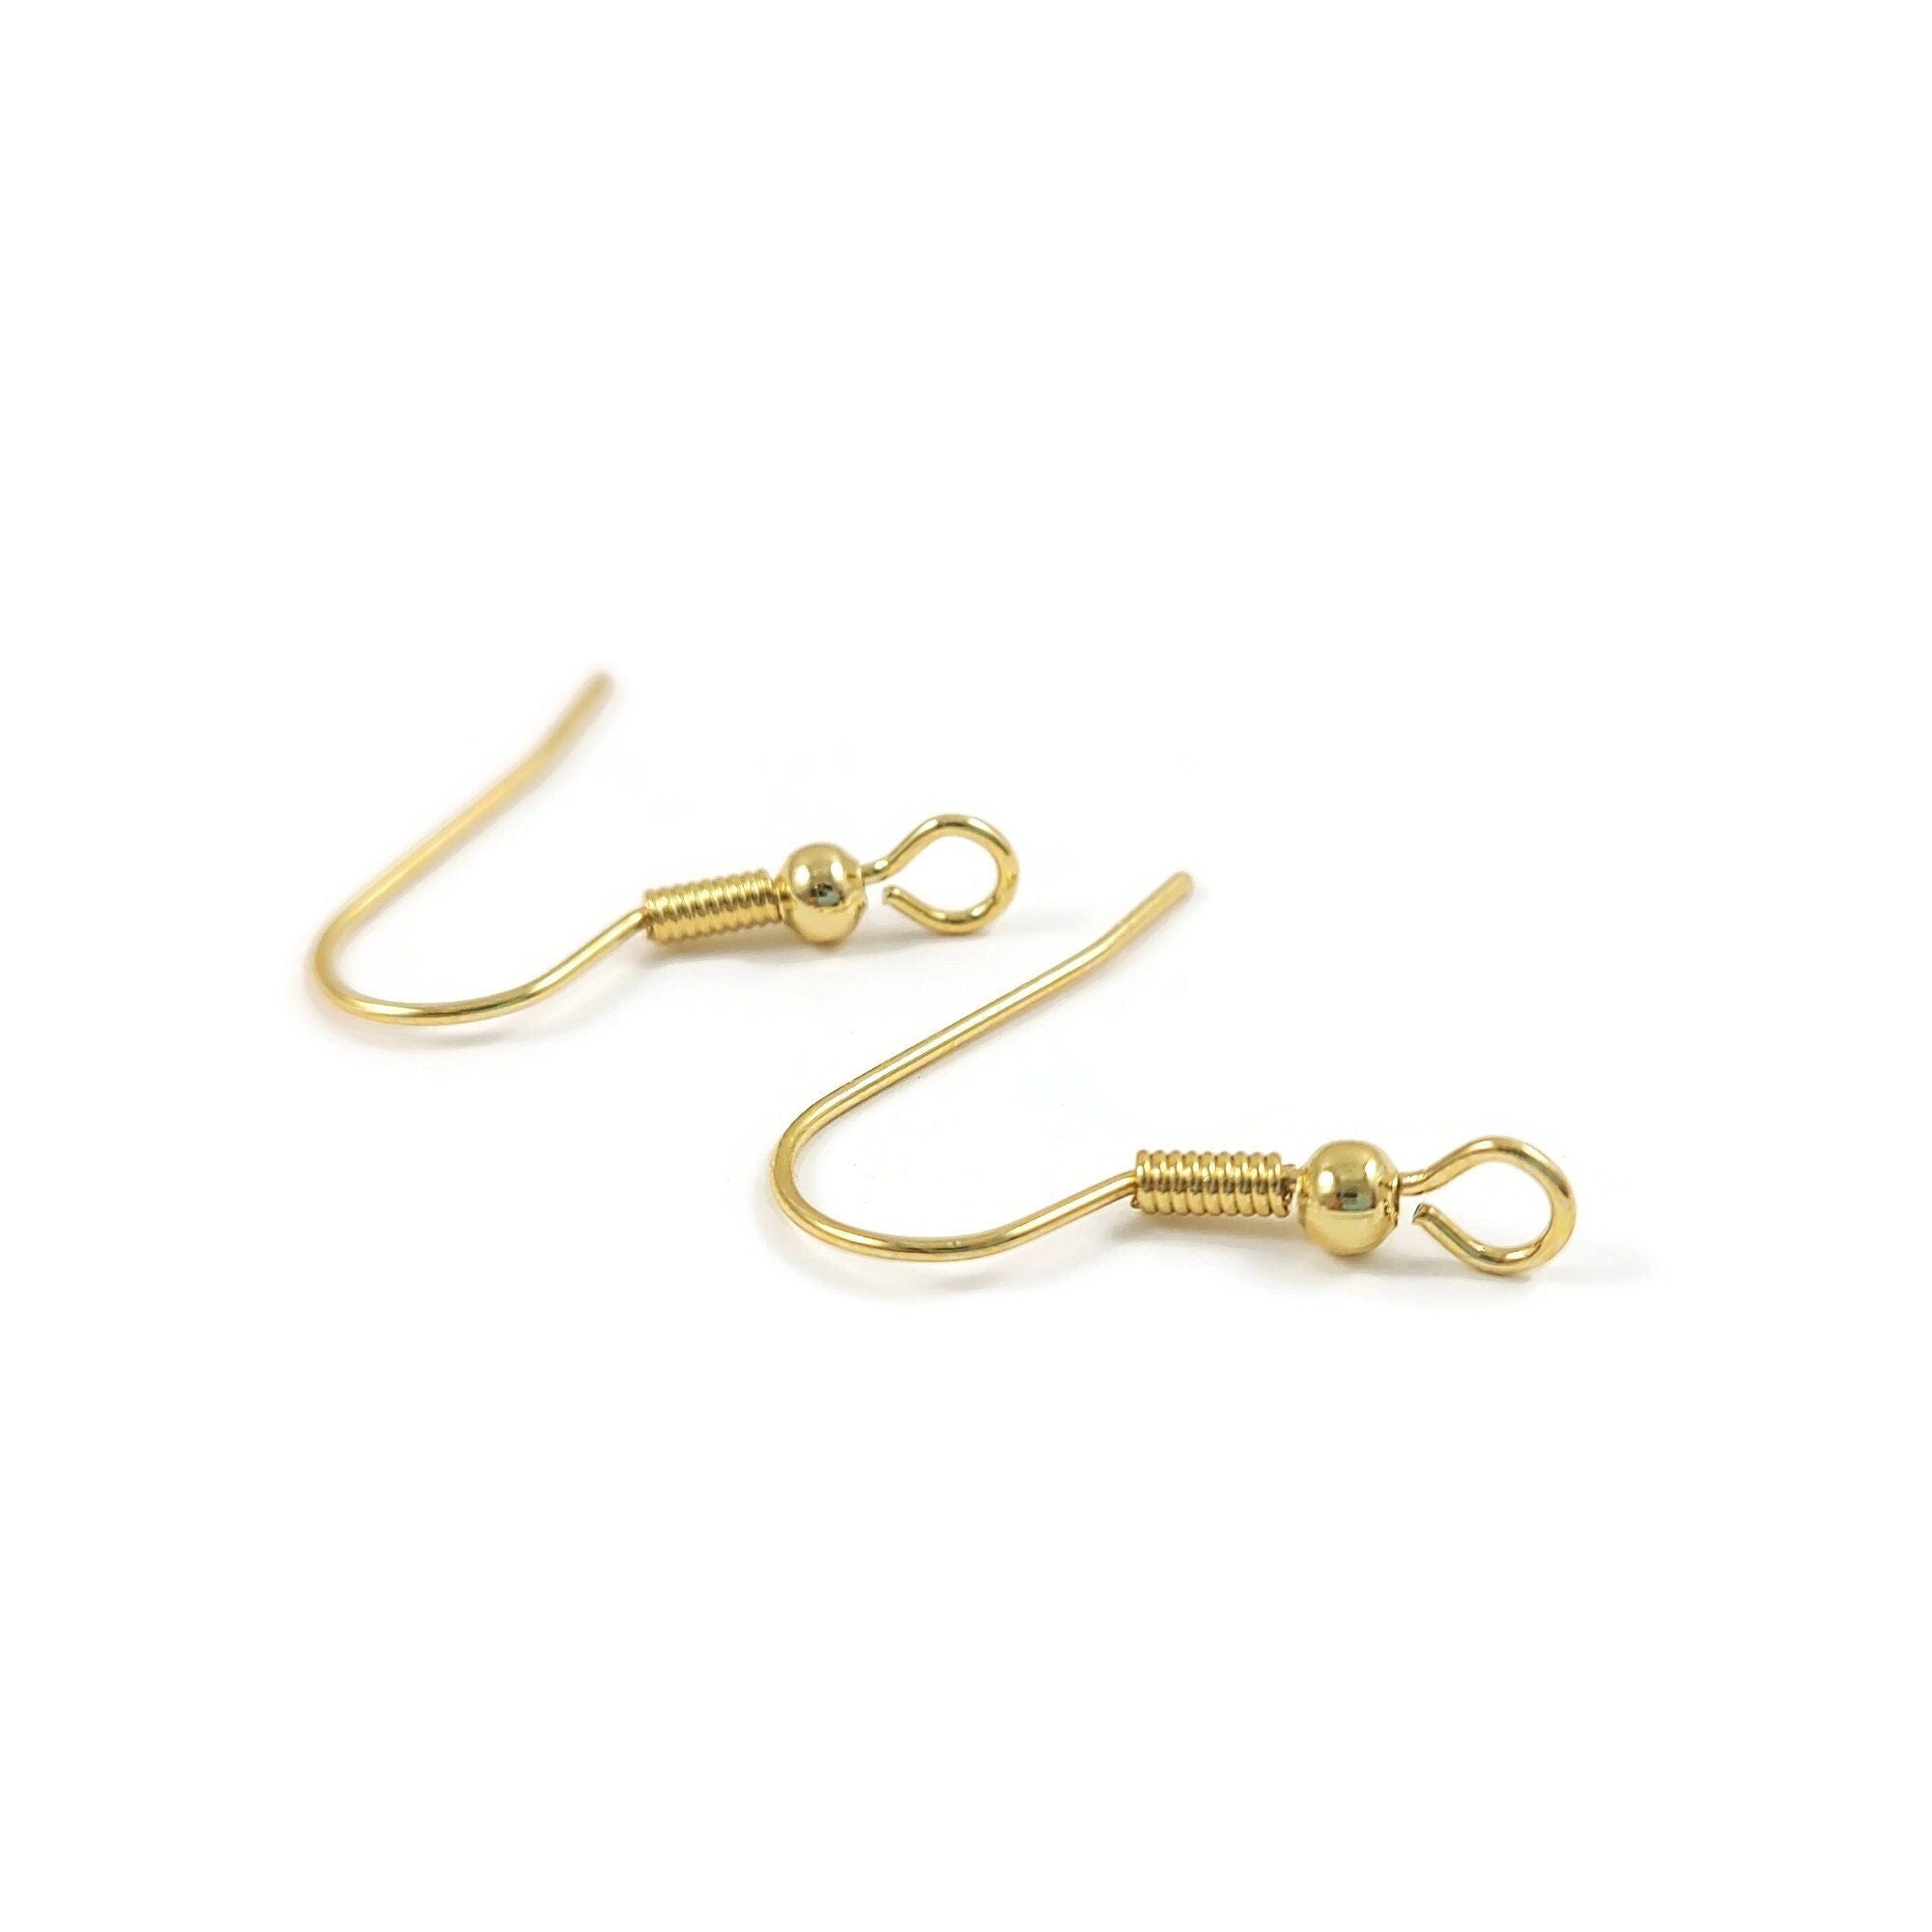 earring hooks, earring hooks Suppliers and Manufacturers at